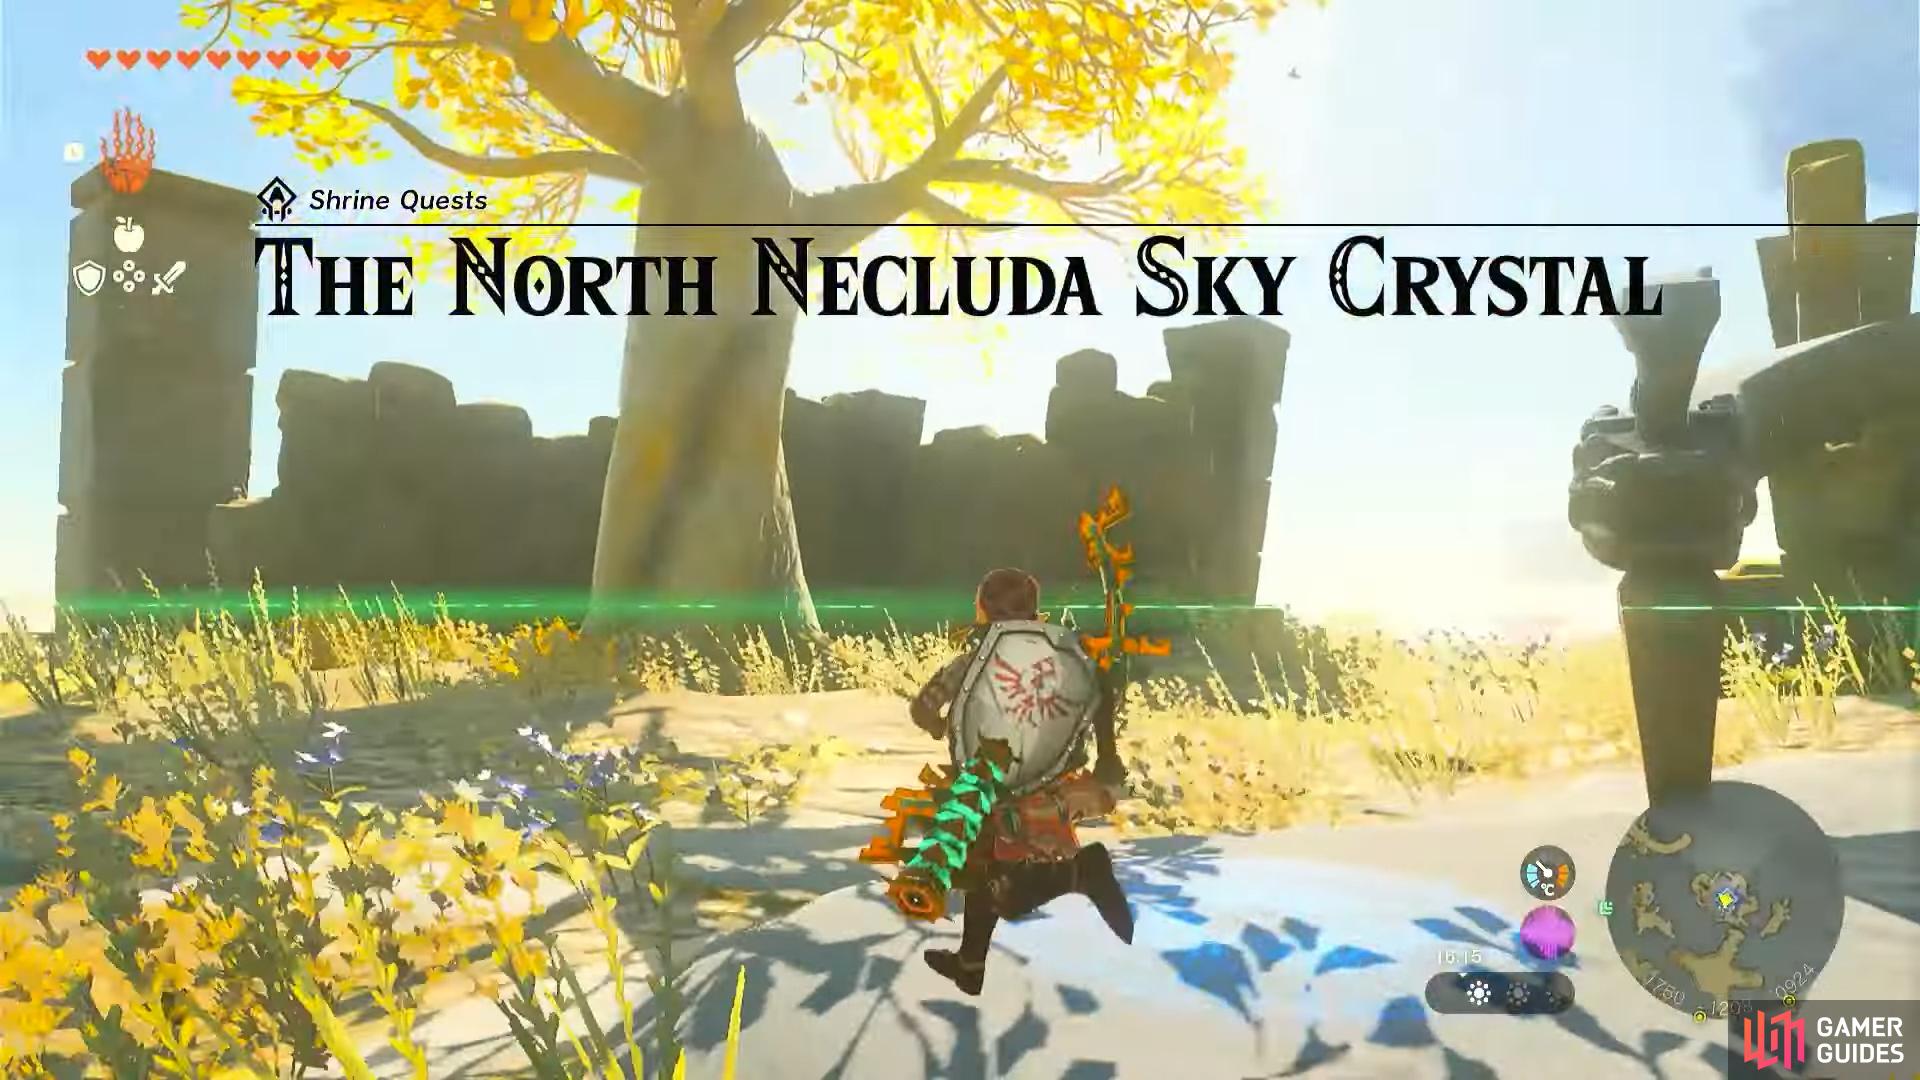 Starting The North Necluda Sky Crystal Shrine Quest.